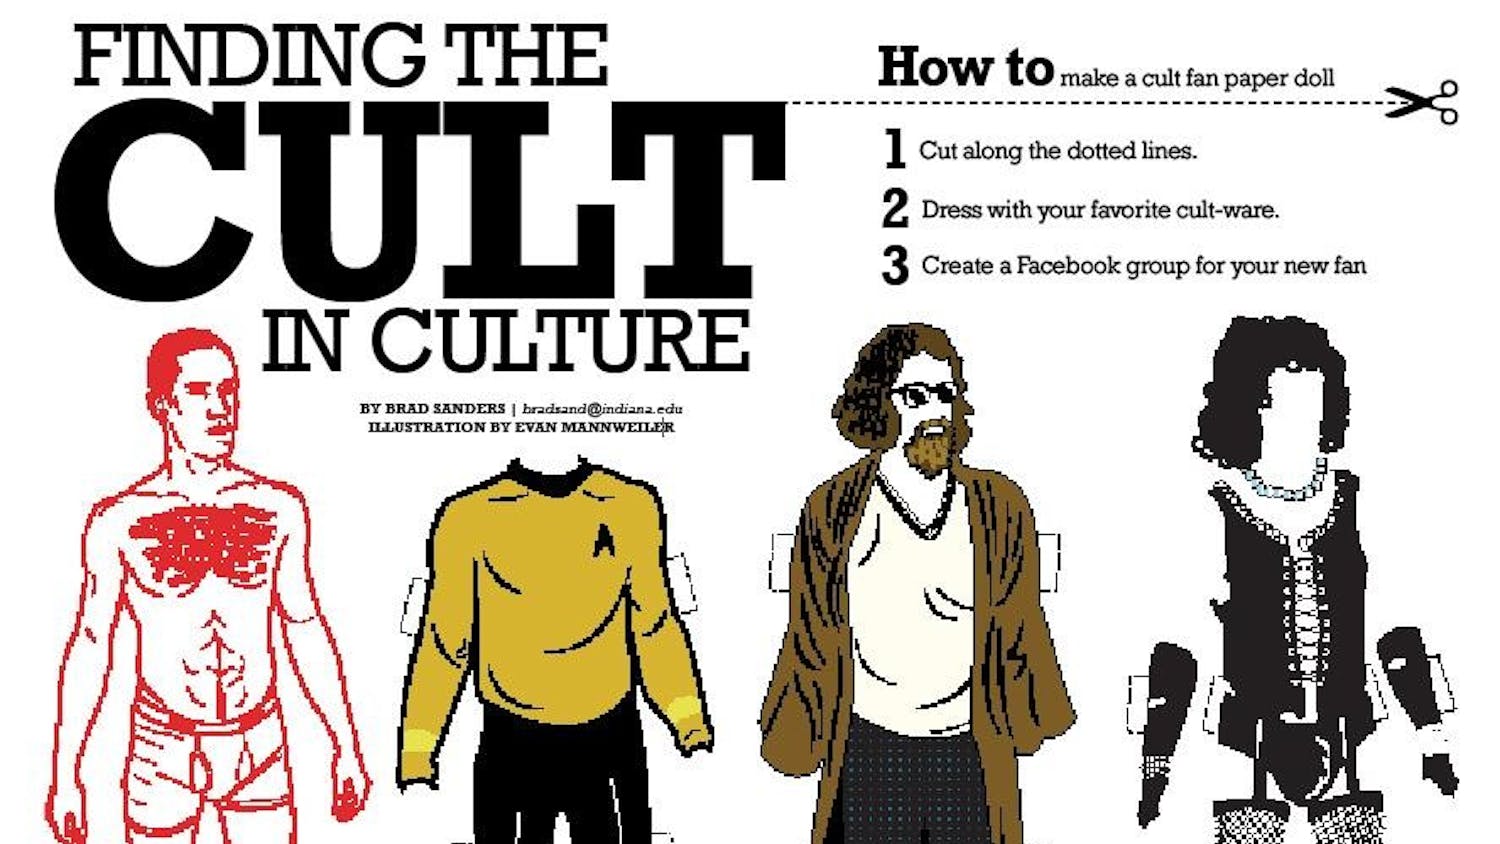 Finding the 'cult' in culture